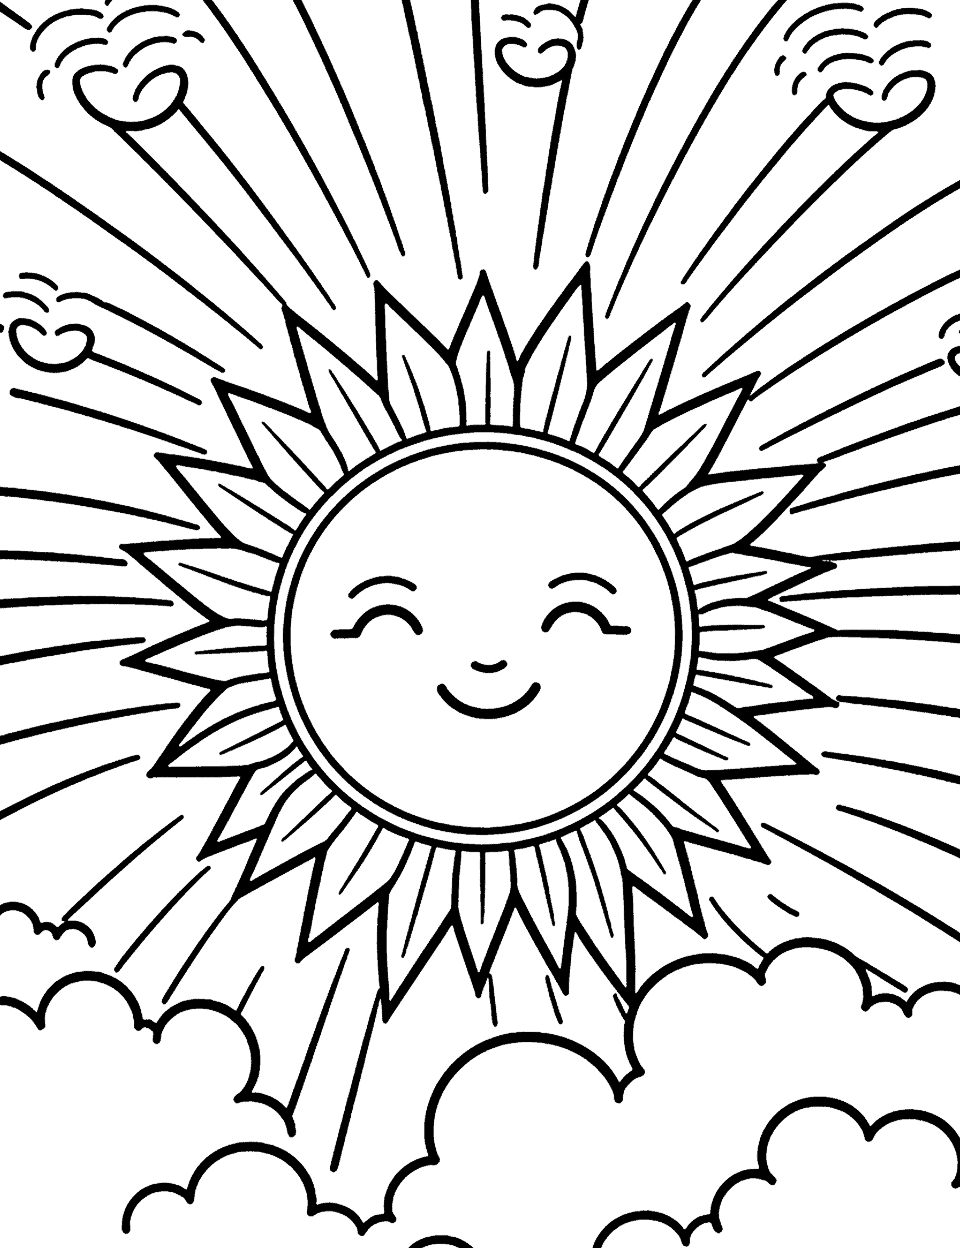 Mandala Rainbow Sun Coloring Page - A mandala-inspired sun with rainbow rays, perfect for older children.